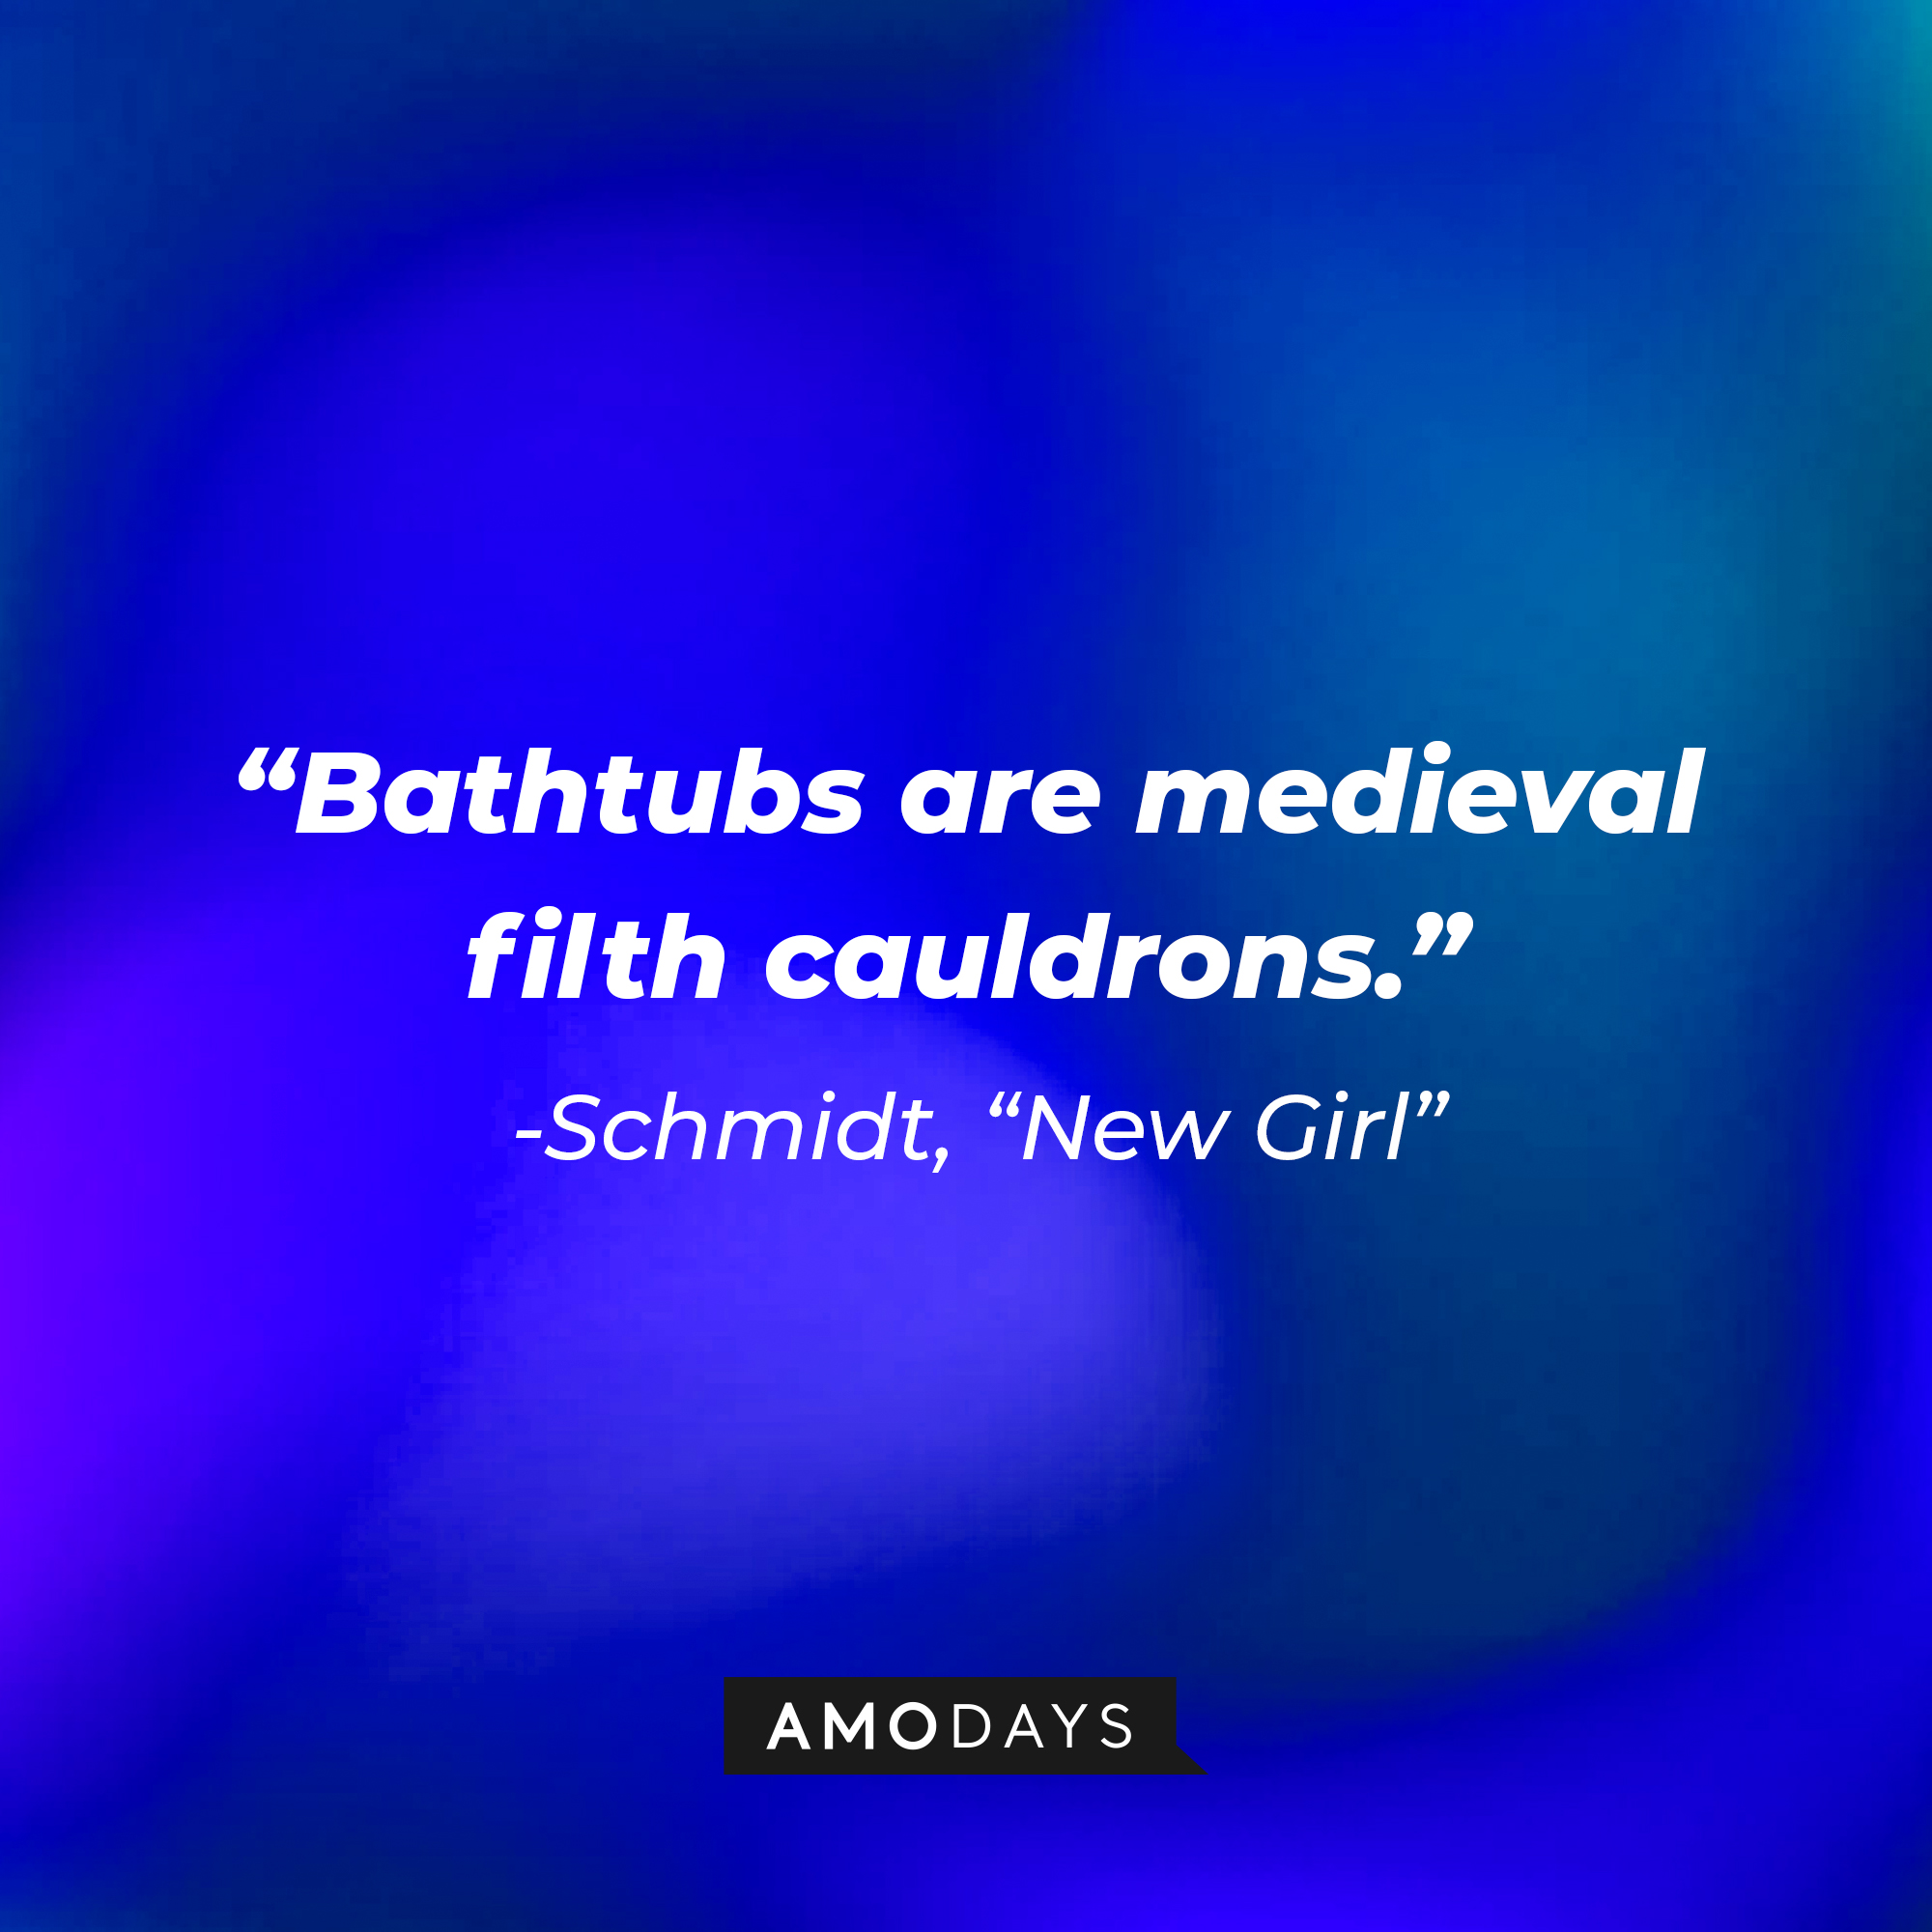 Schmidt's quote: "Bathtubs are medieval filth cauldrons." | Source: Amodays